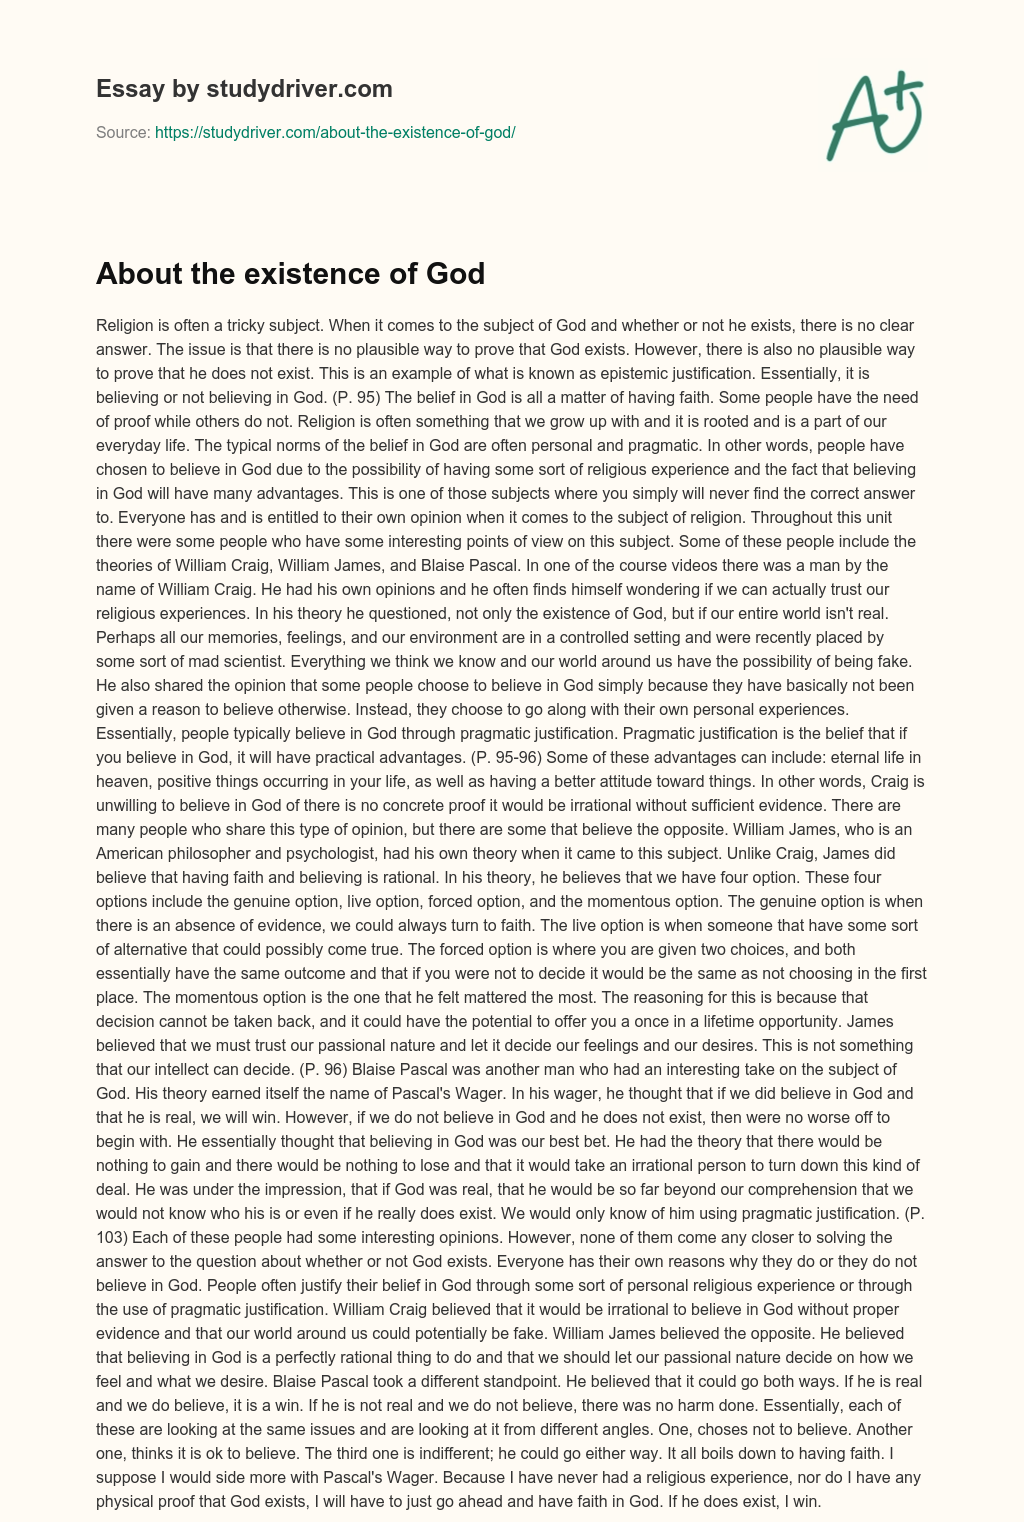 About the Existence of God essay